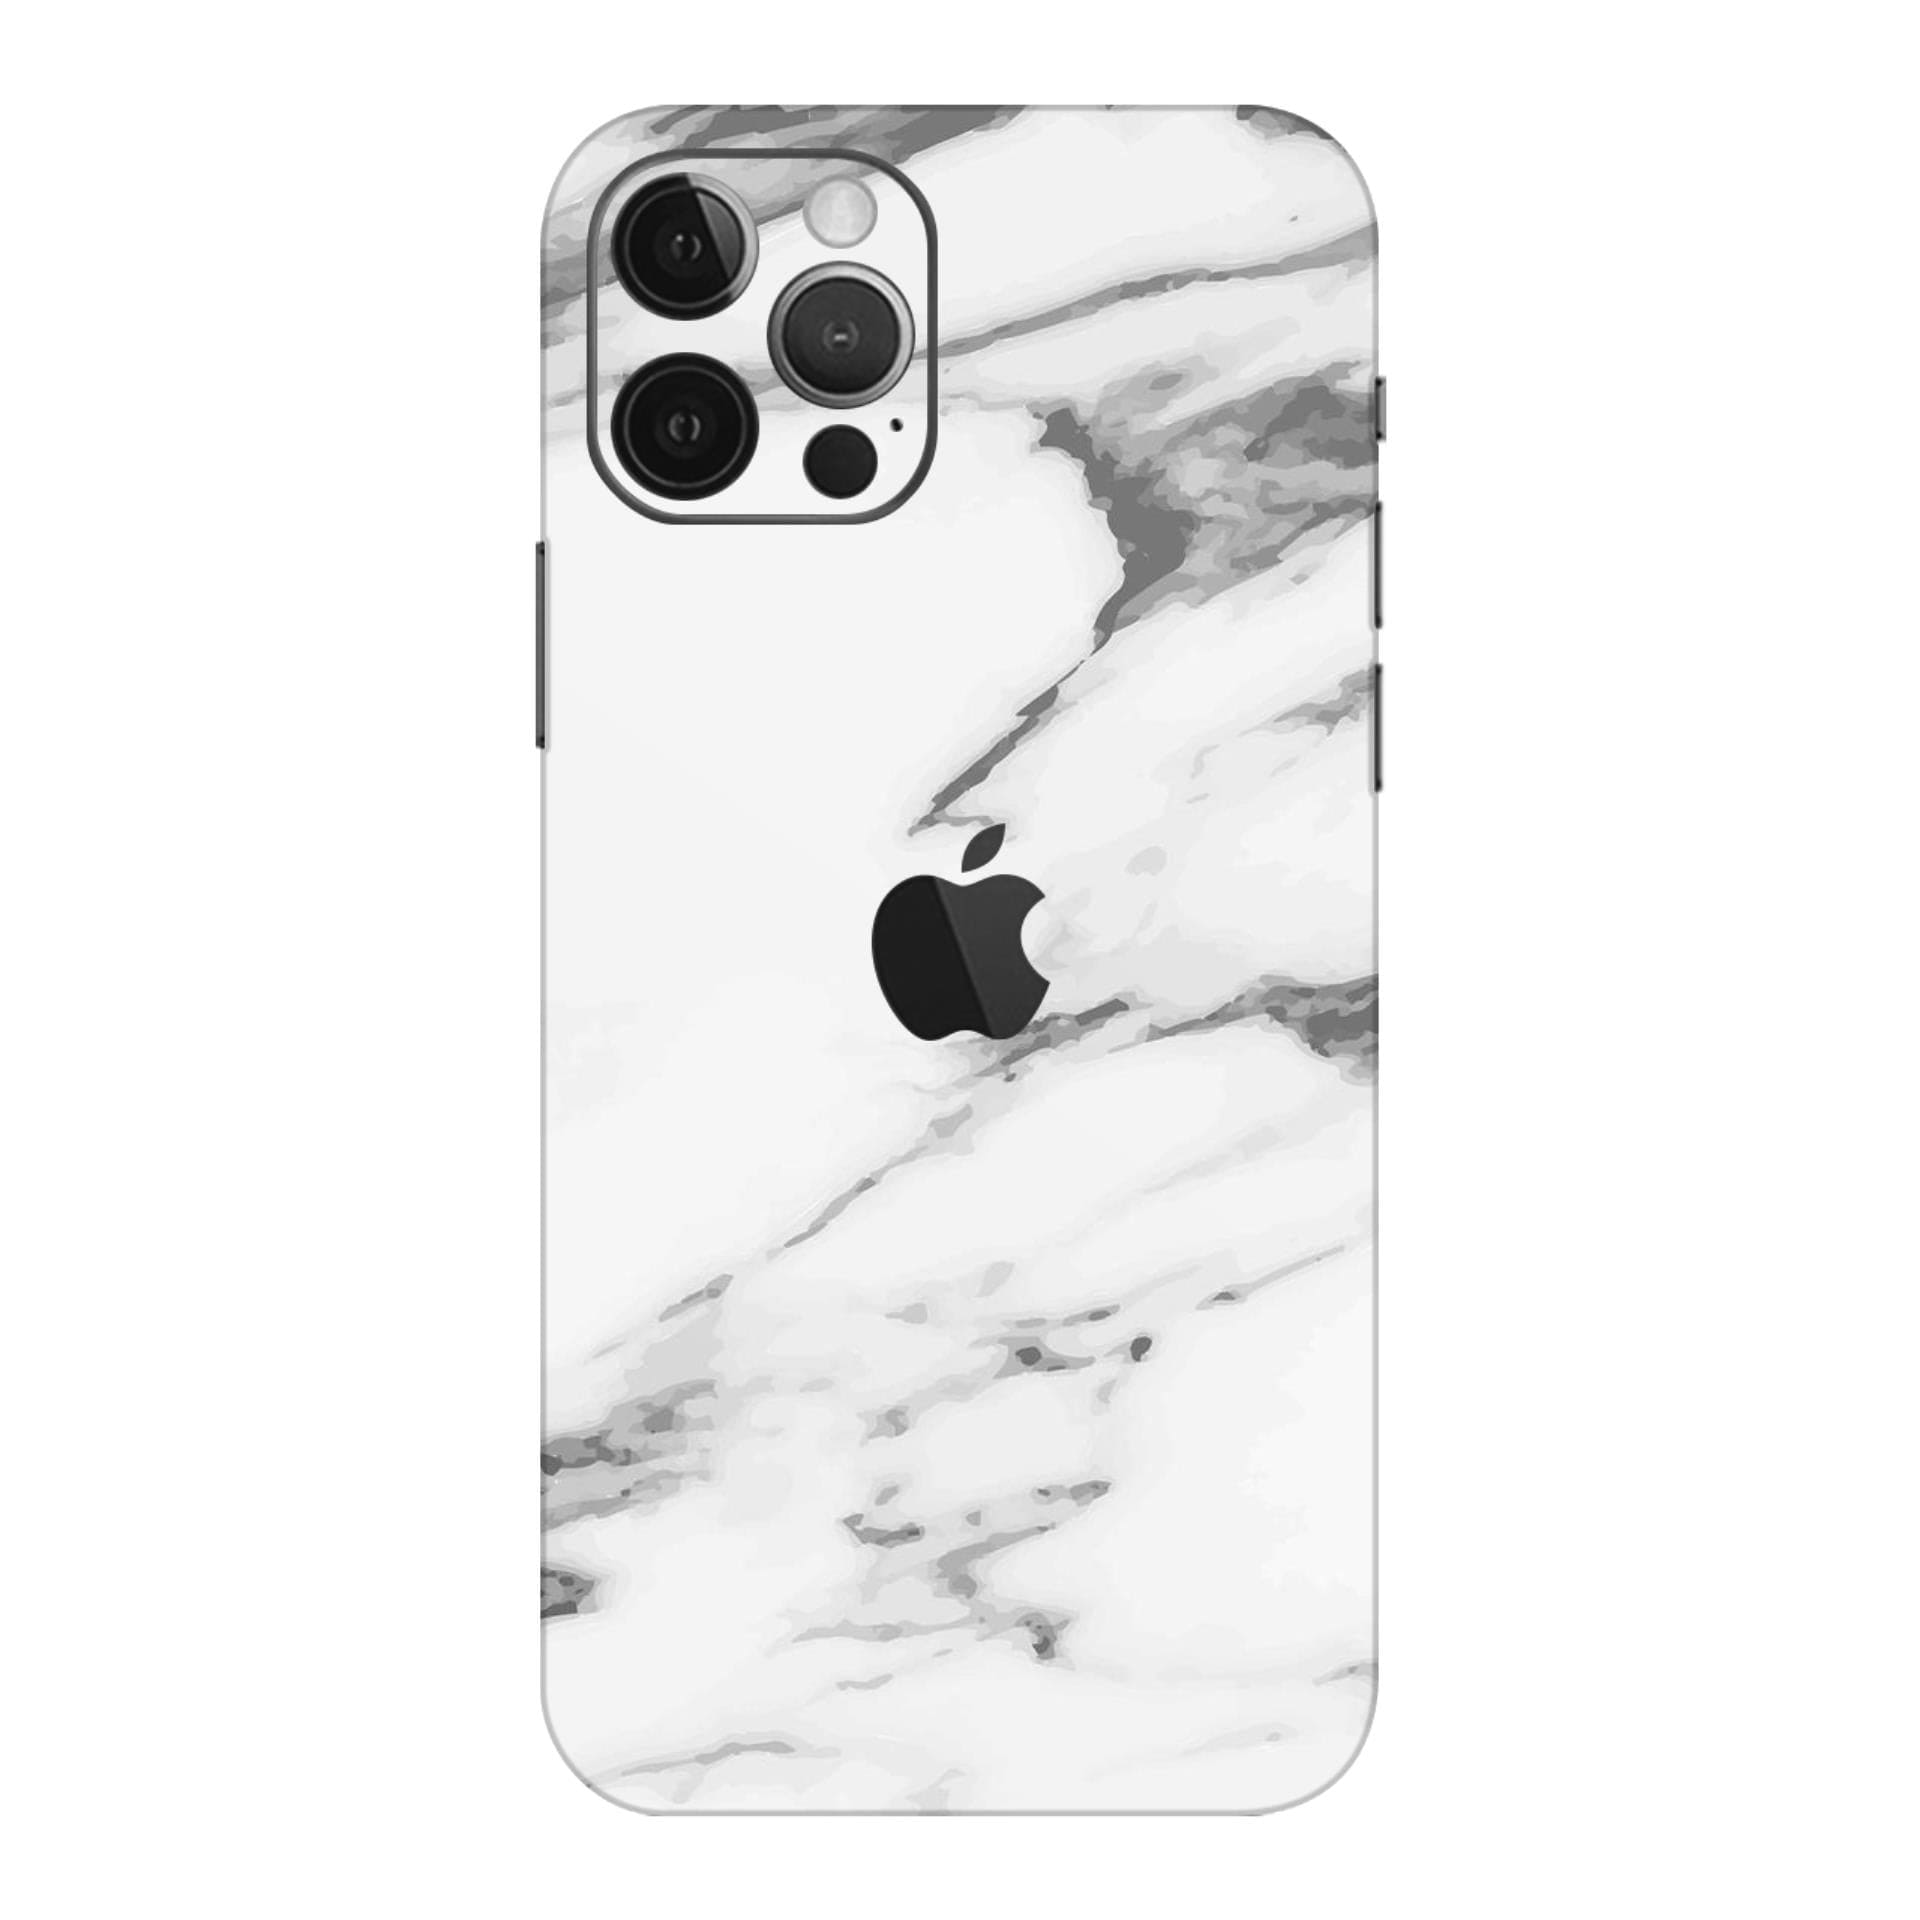 iphone 12 Pro Max Marble White skins